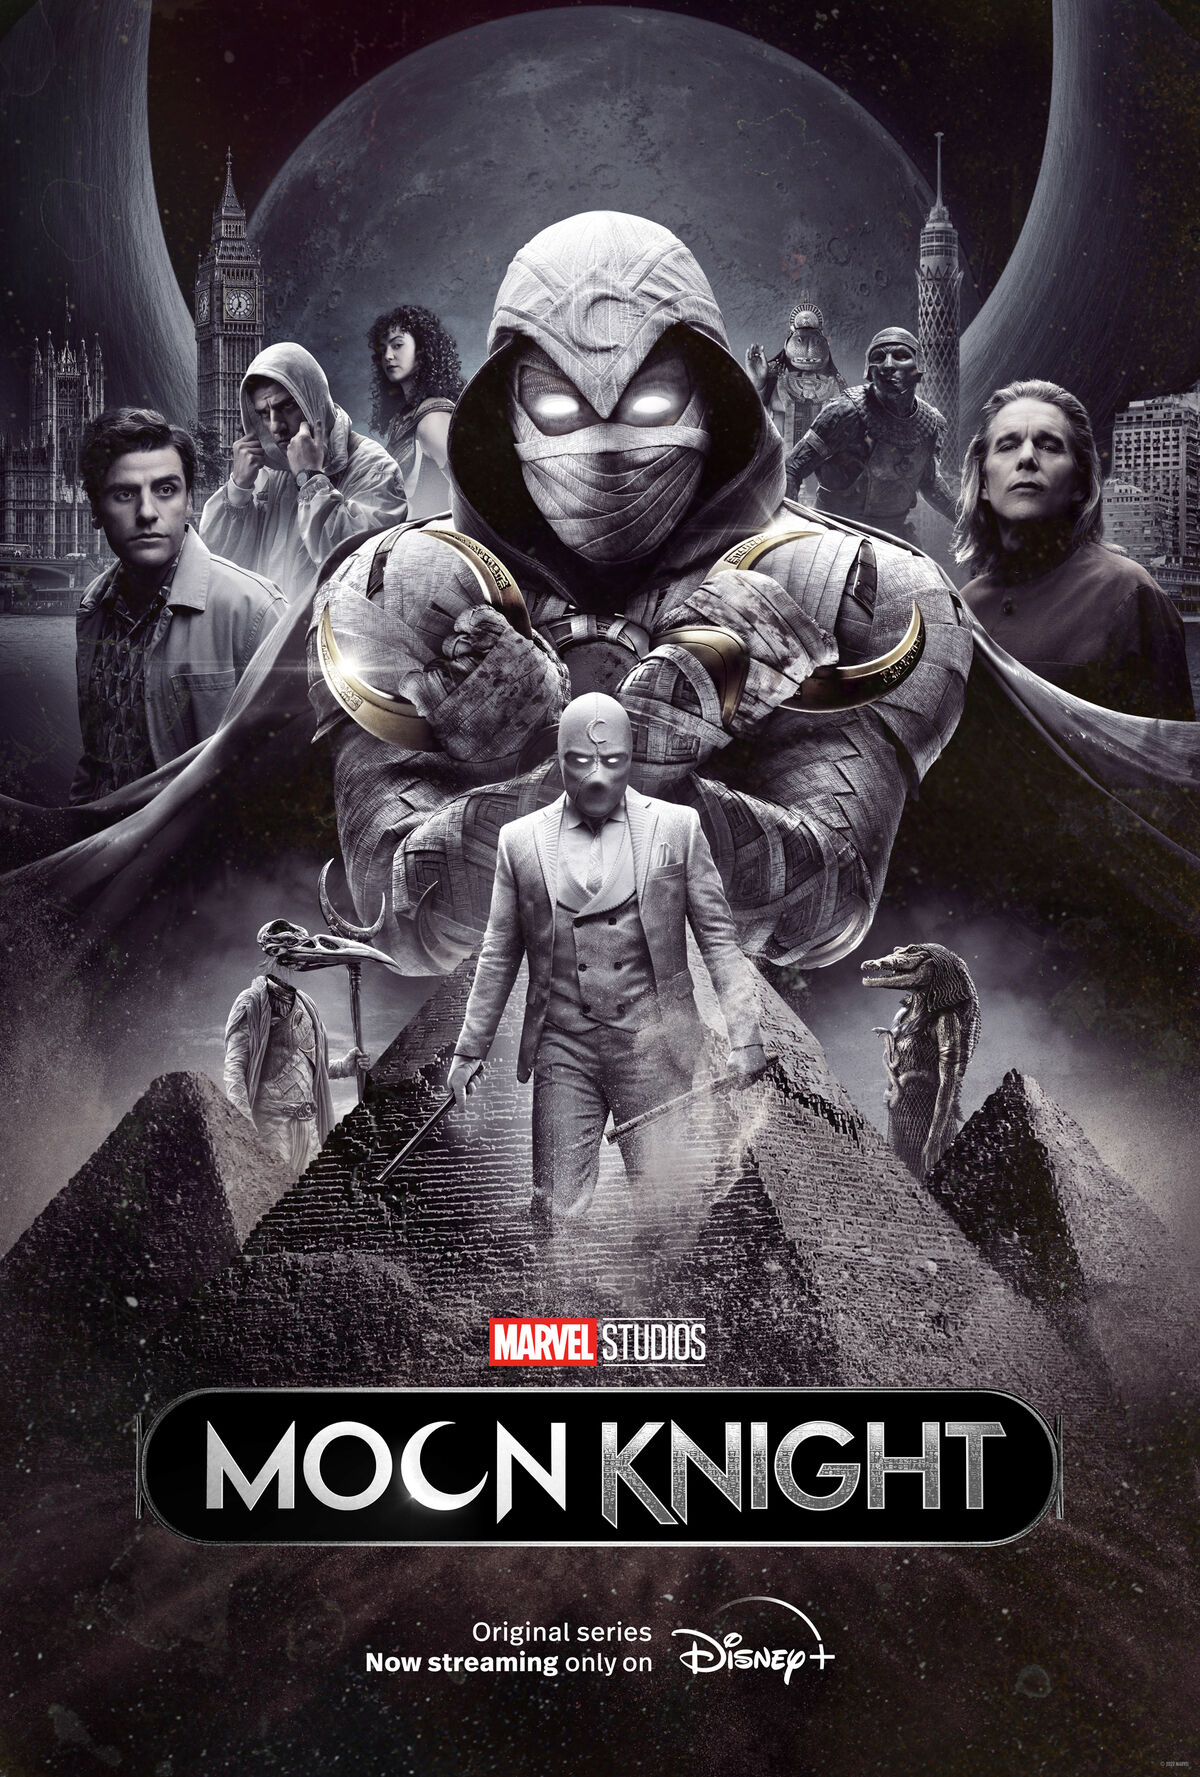 Moon Knight Cast: Other Movies And Shows They Were In - FandomWire